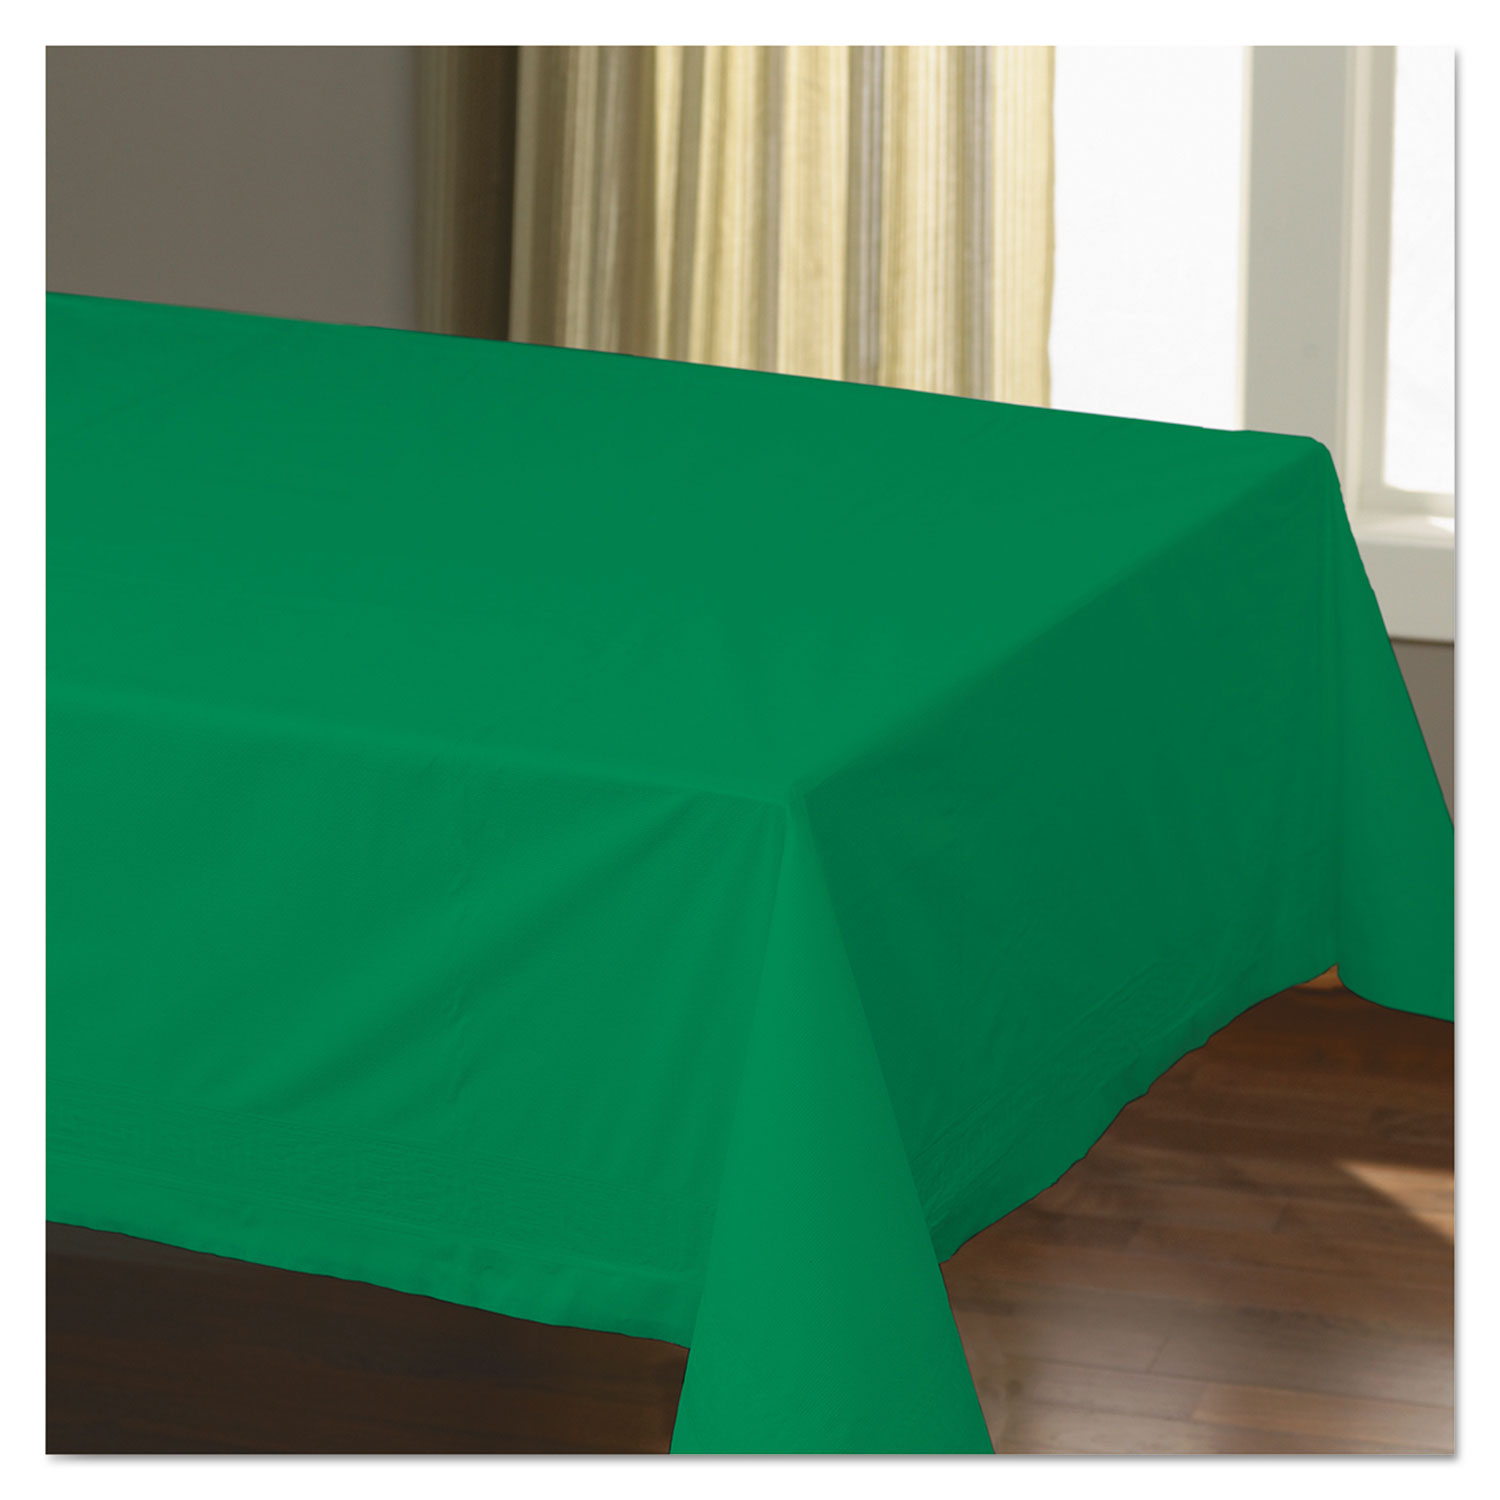 Cellutex Table Covers, Tissue/Polylined, 54 x 108, Jade Green, 25/Carton